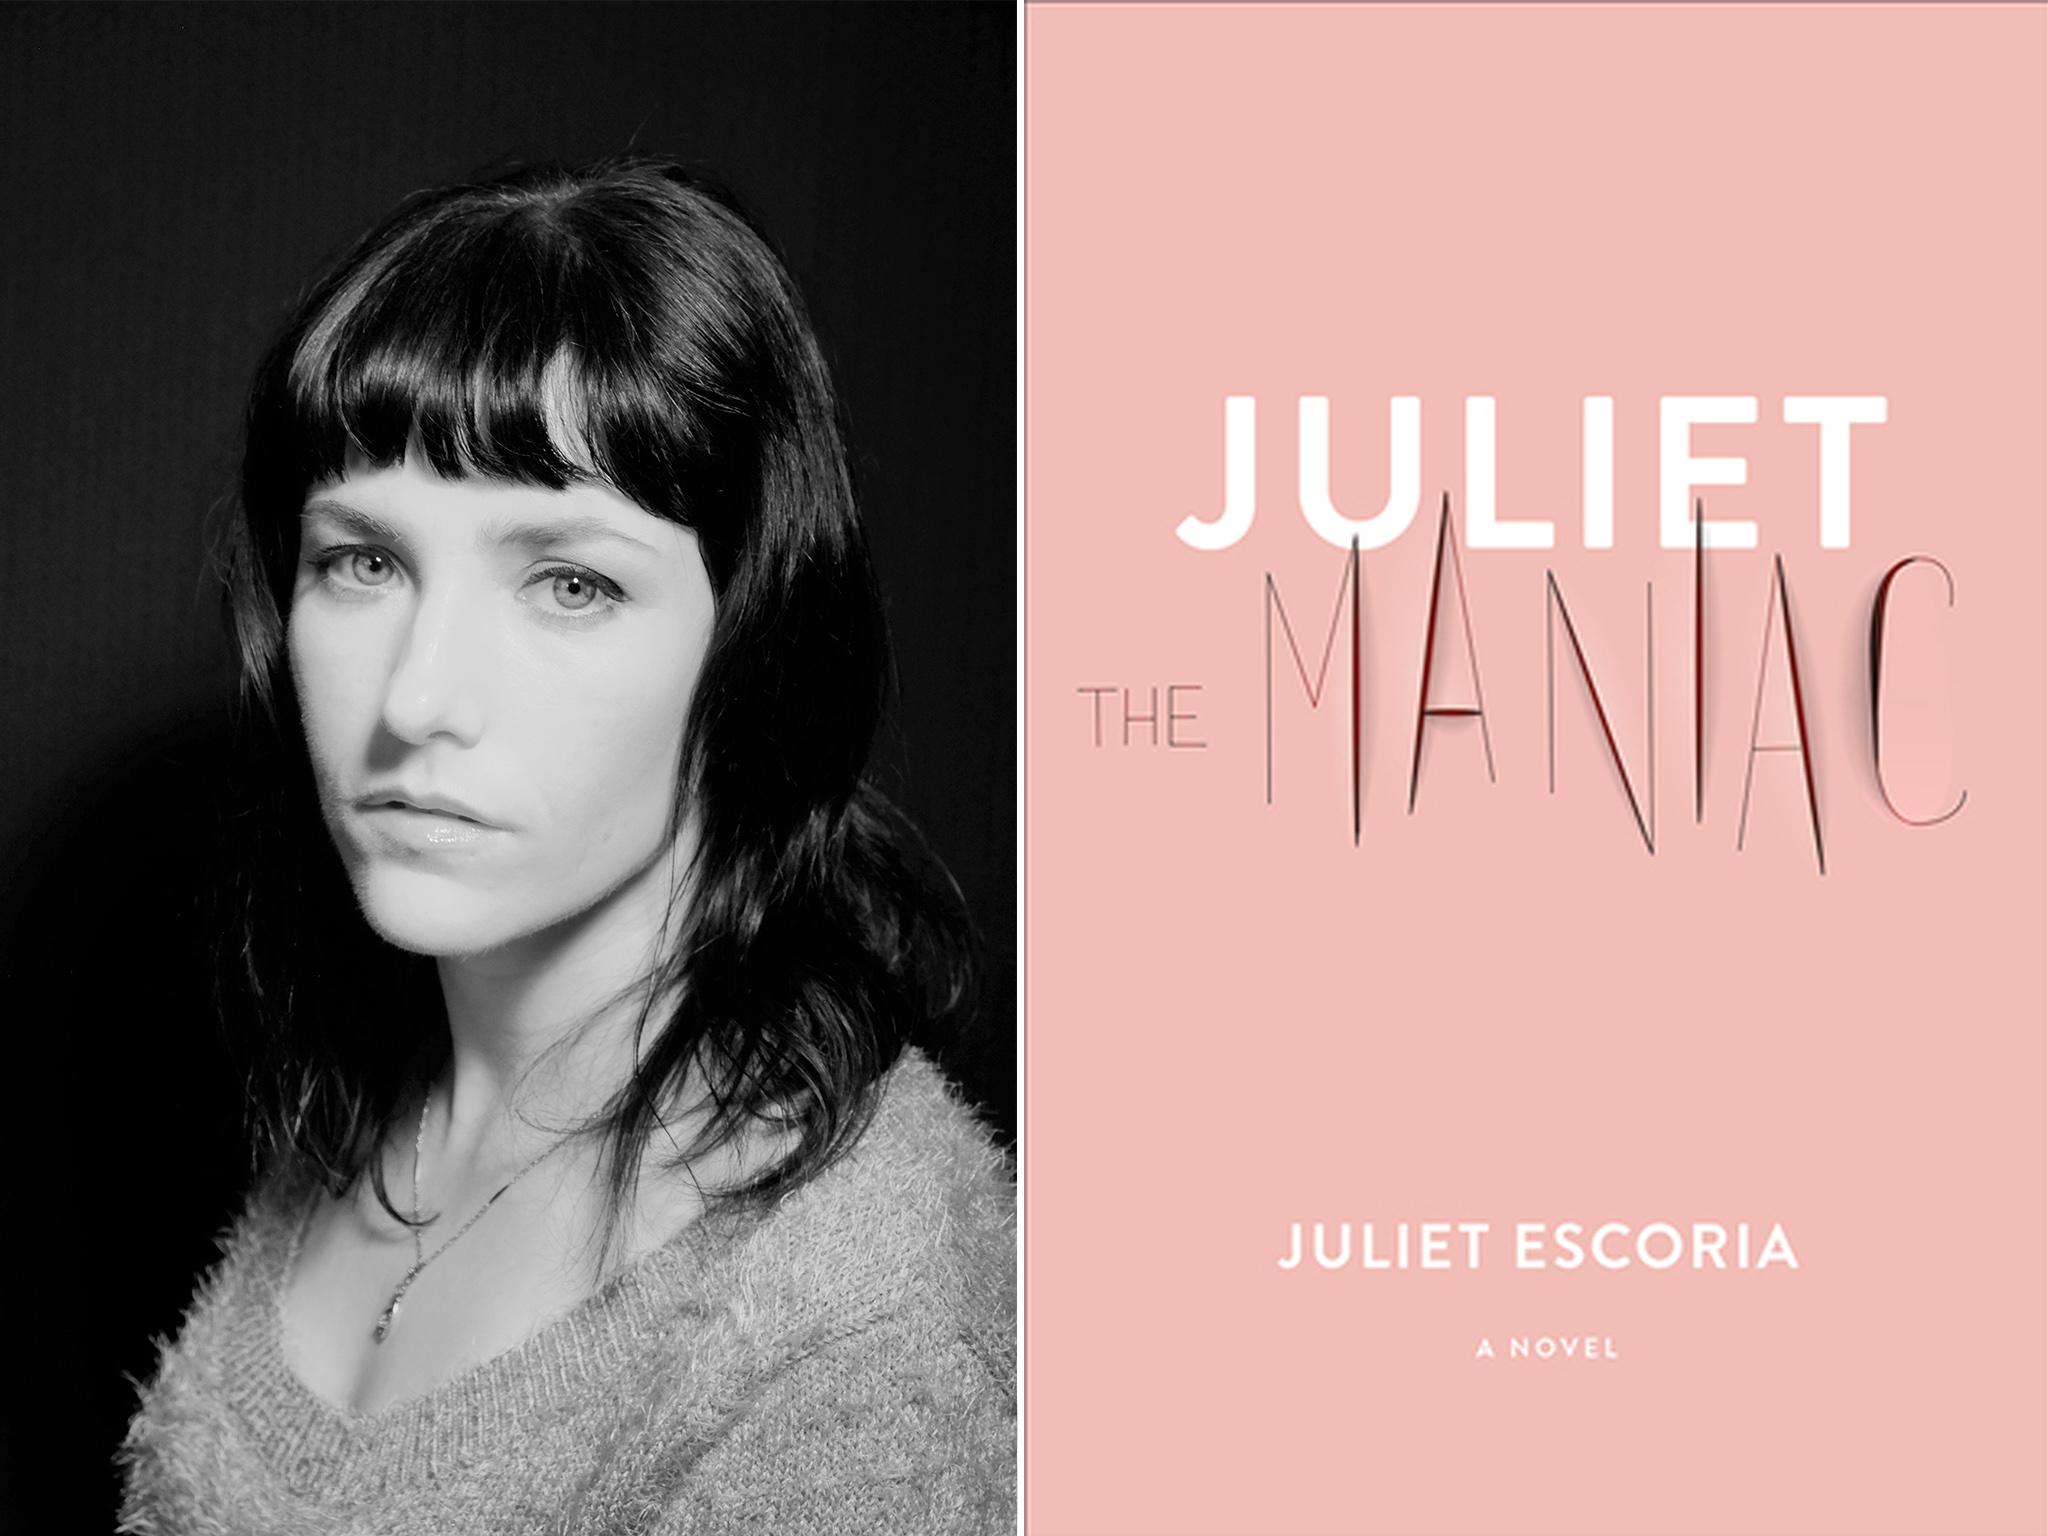 Juliet the Maniac by Juliet Escoria, review A startlingly honest tale of mental illness and addiction The Independent The Independent picture pic